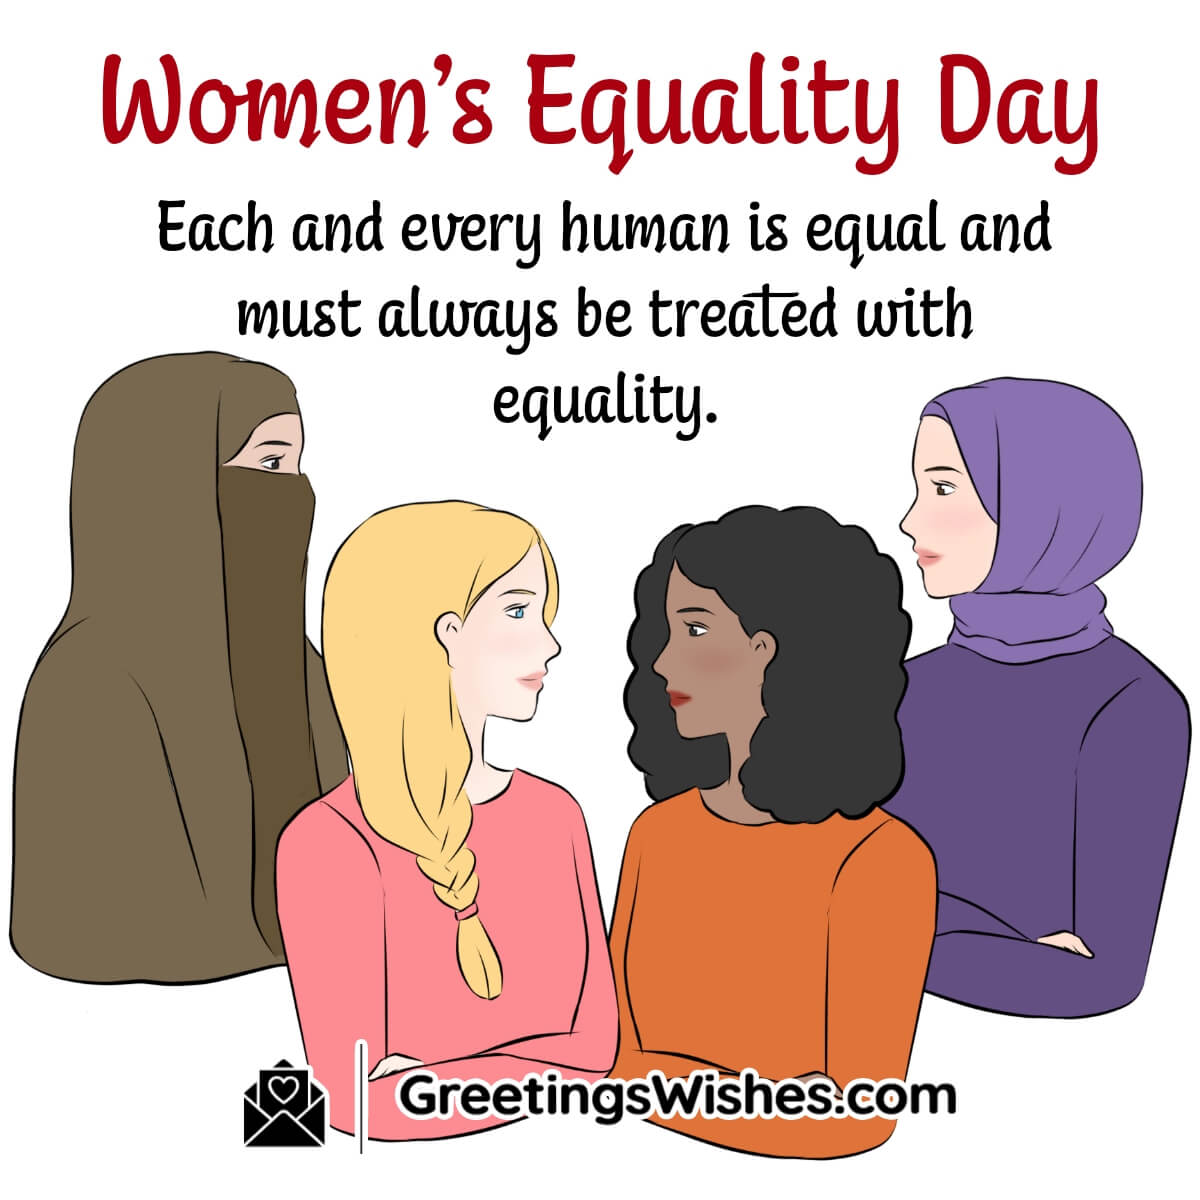 Women's Equality Day Cards